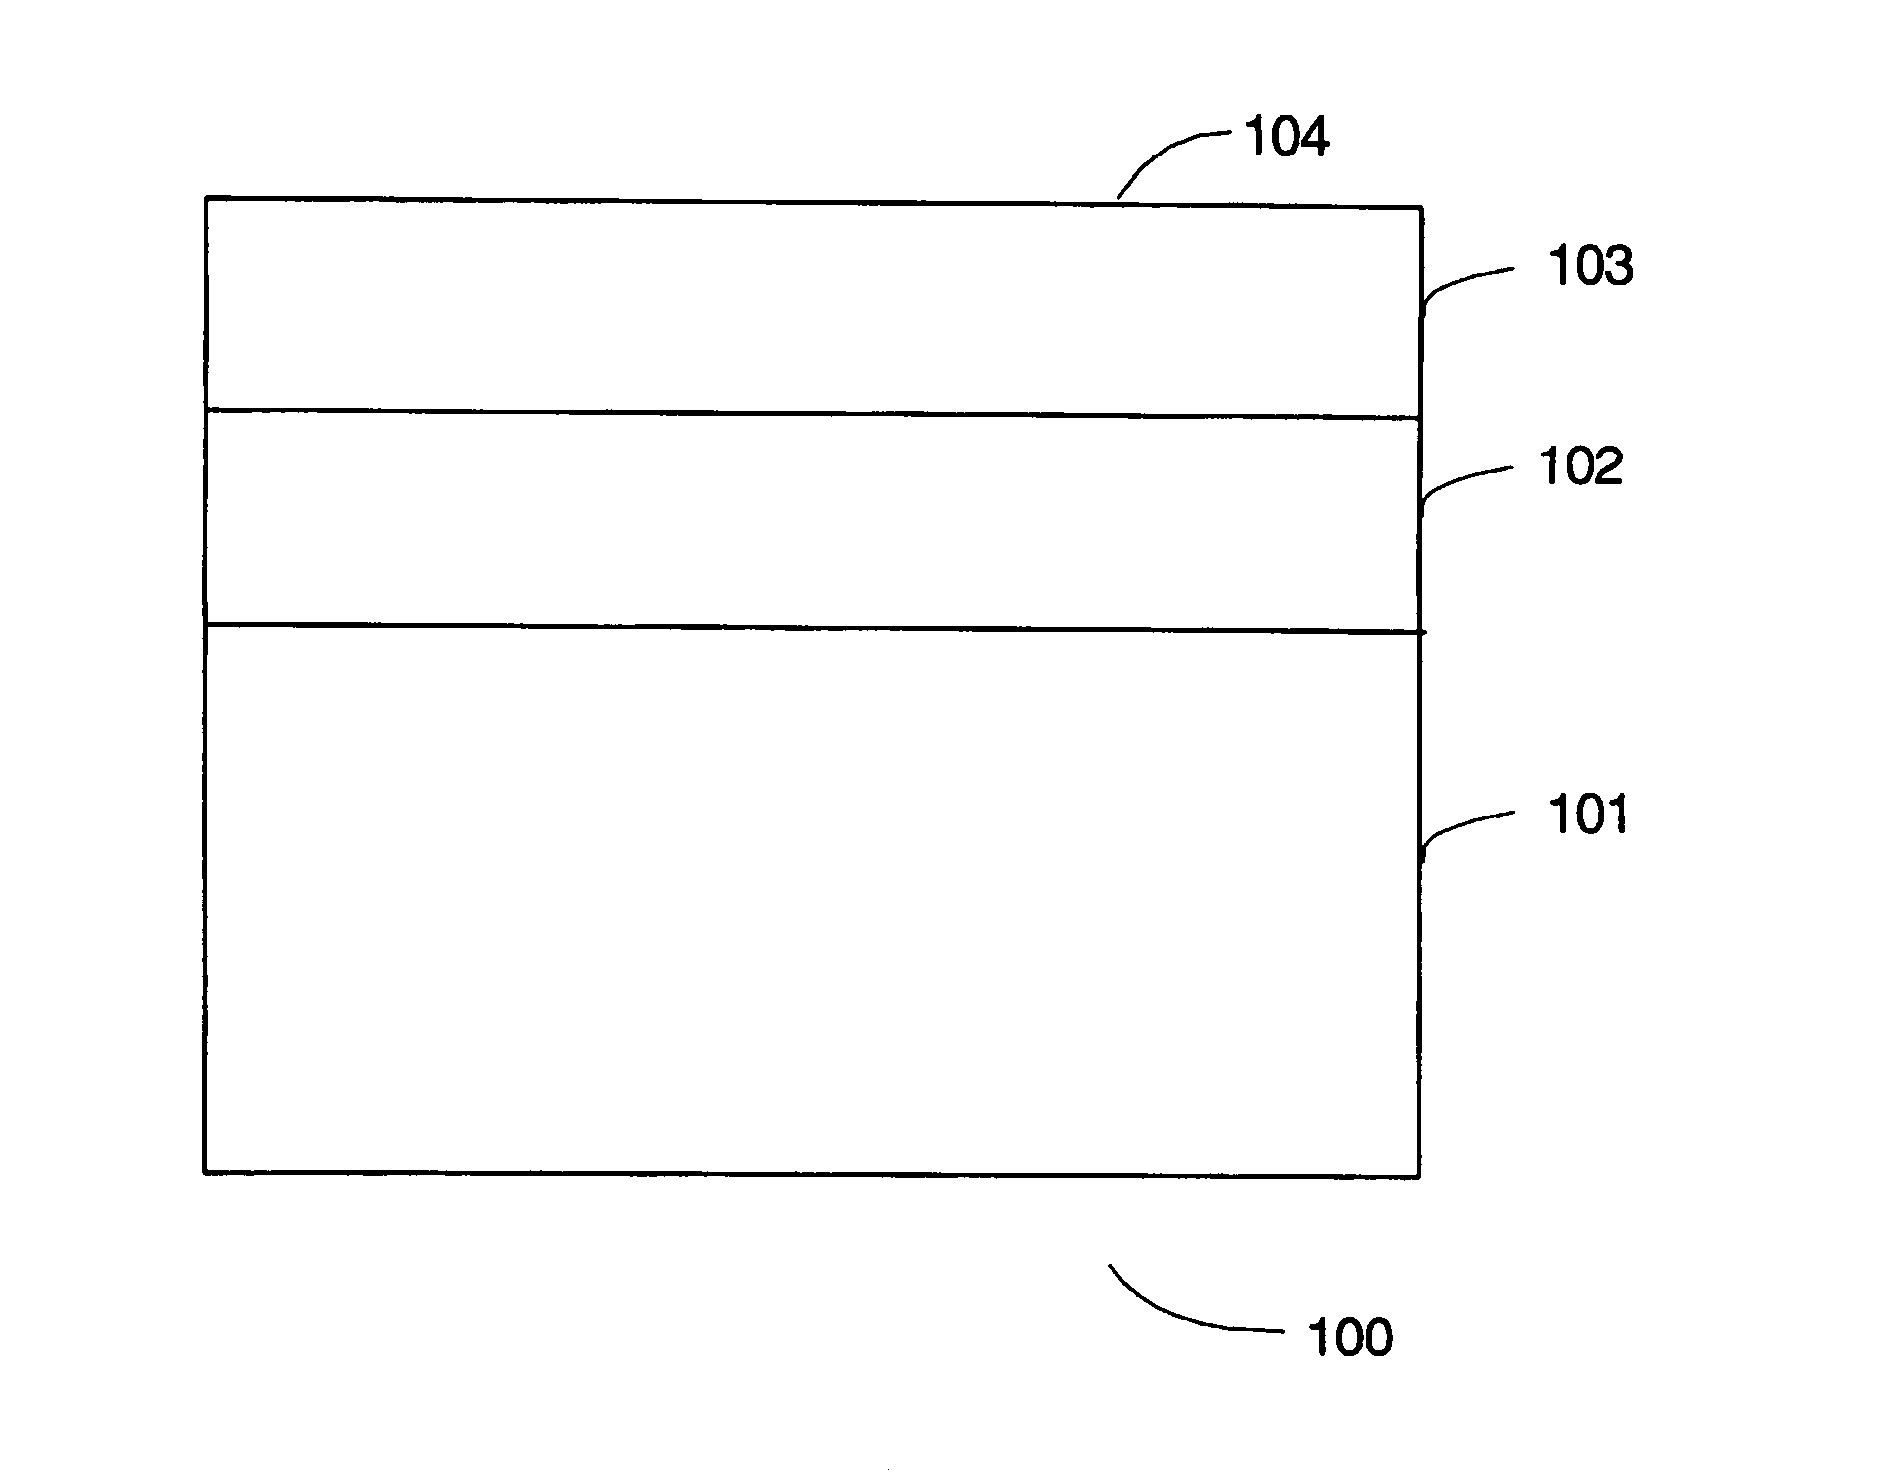 Polycrystalline diamond compact (PDC) cutting element having multiple catalytic elements